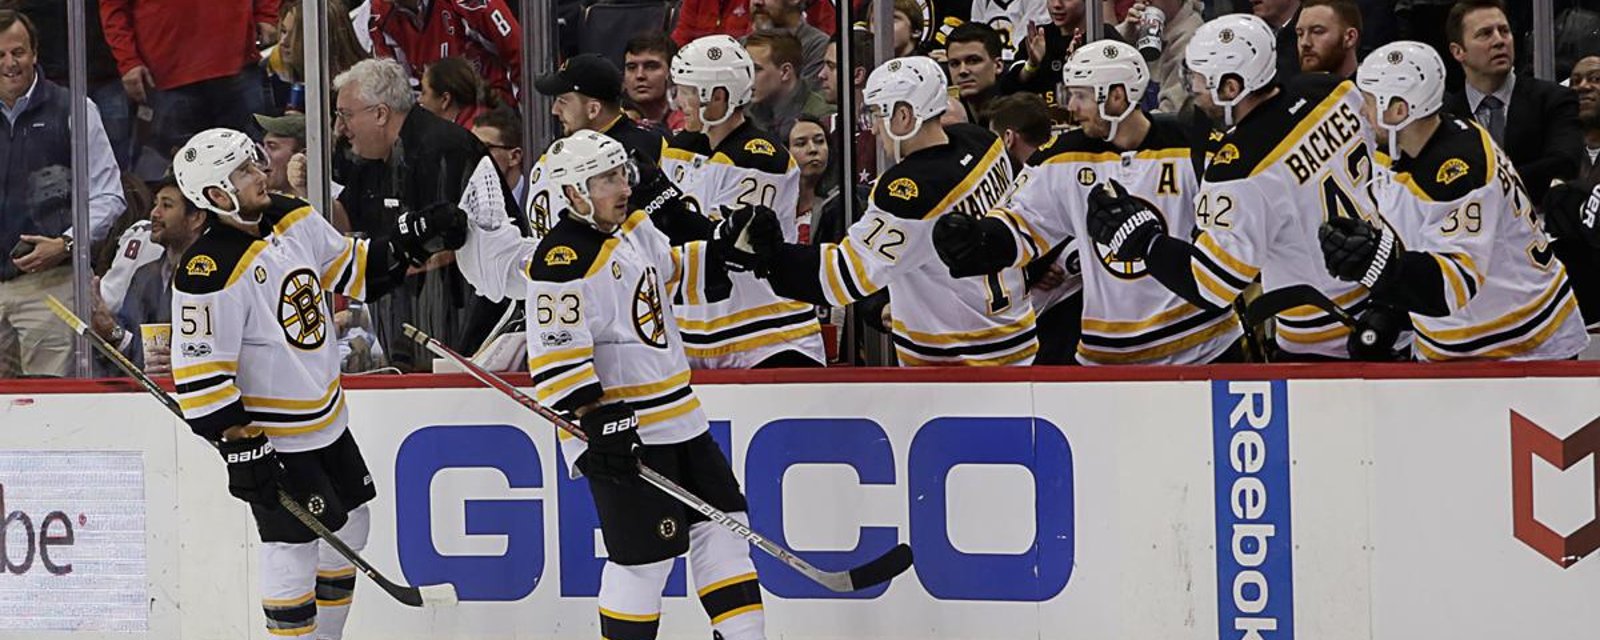 BREAKING : Bruins forced to burn first year of rookie contract following injuries. 